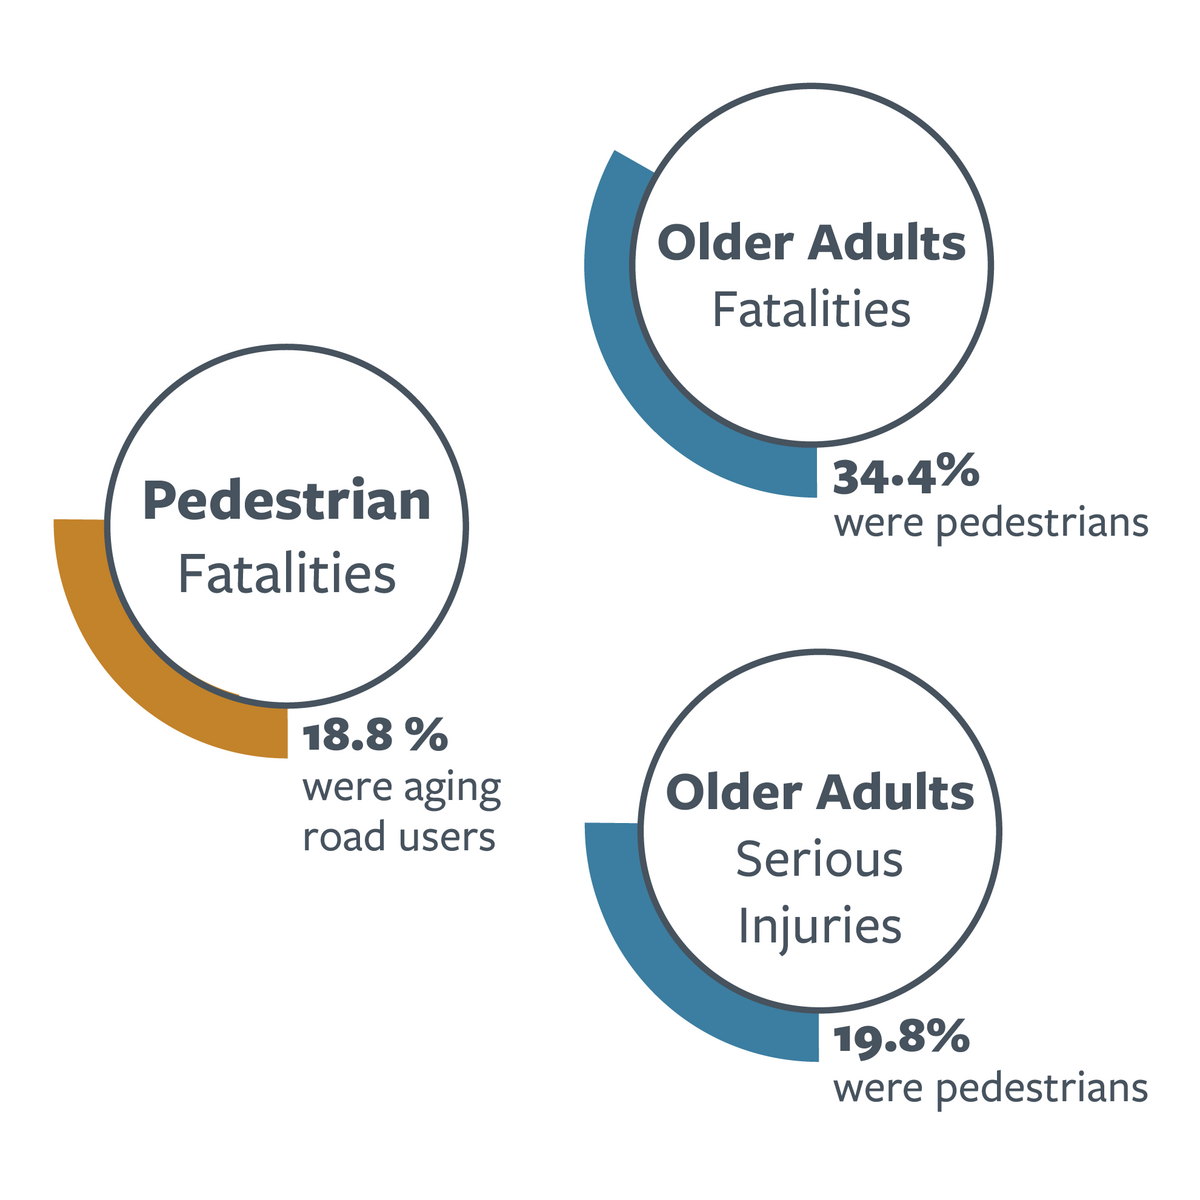  Infographic comparing fatality and serious injury percentages between older adults and pedestrians in California in 2021